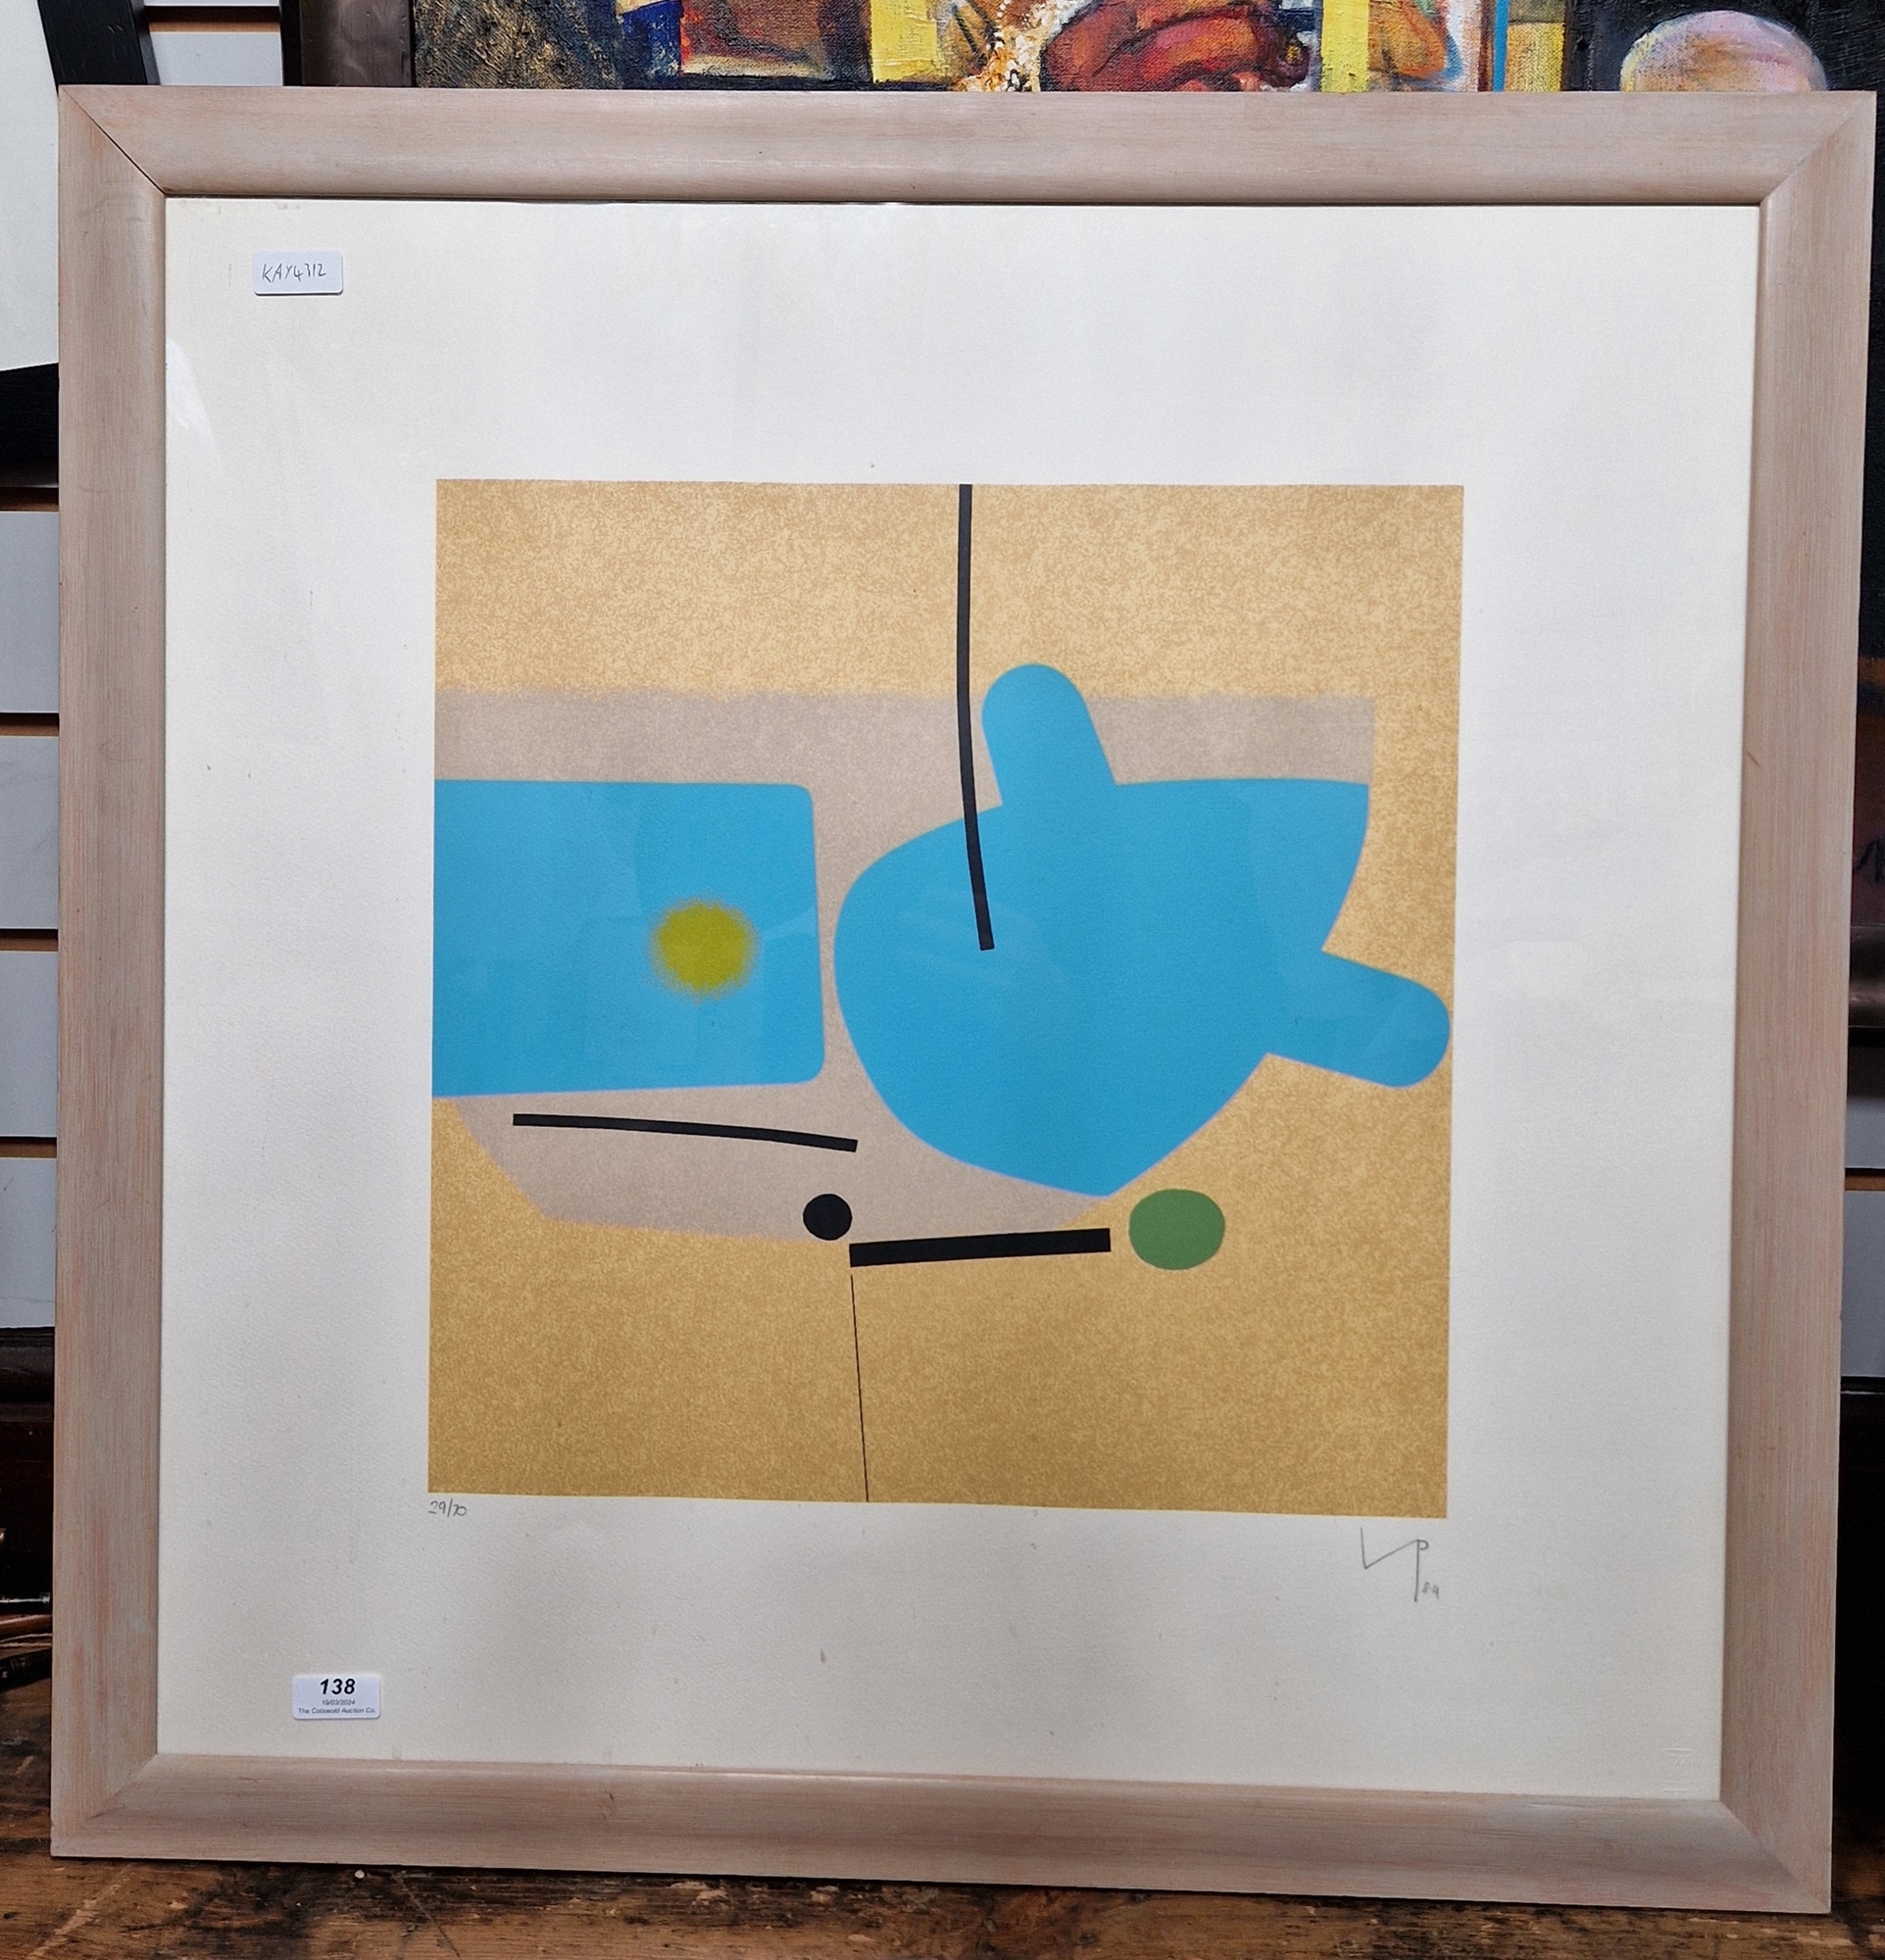 Victor Pasmore (1908-1998)  Two images  "Blue" 1984 Signed limited edition screenprint Edition 29/ - Image 2 of 6